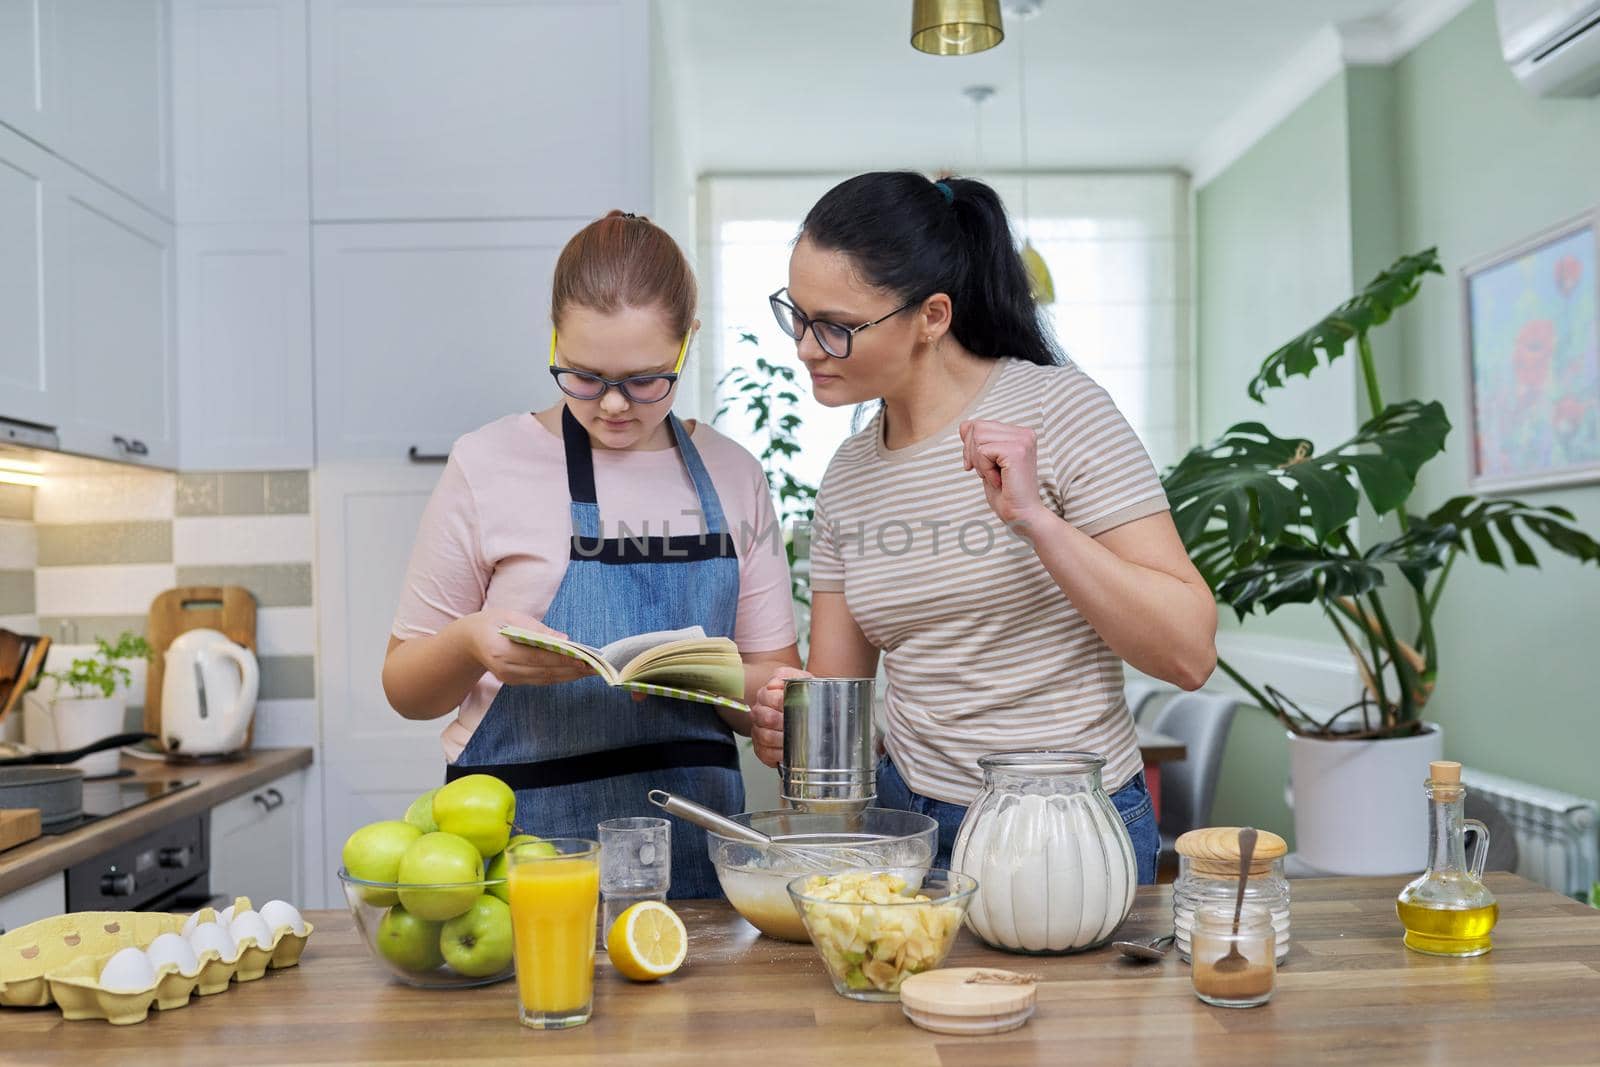 Mom and teenage daughter preparing apple pie in kitchen together, looking at recipe book, talking and laughing. Communication between teenager and parent, lifestyle, cooking at home concept